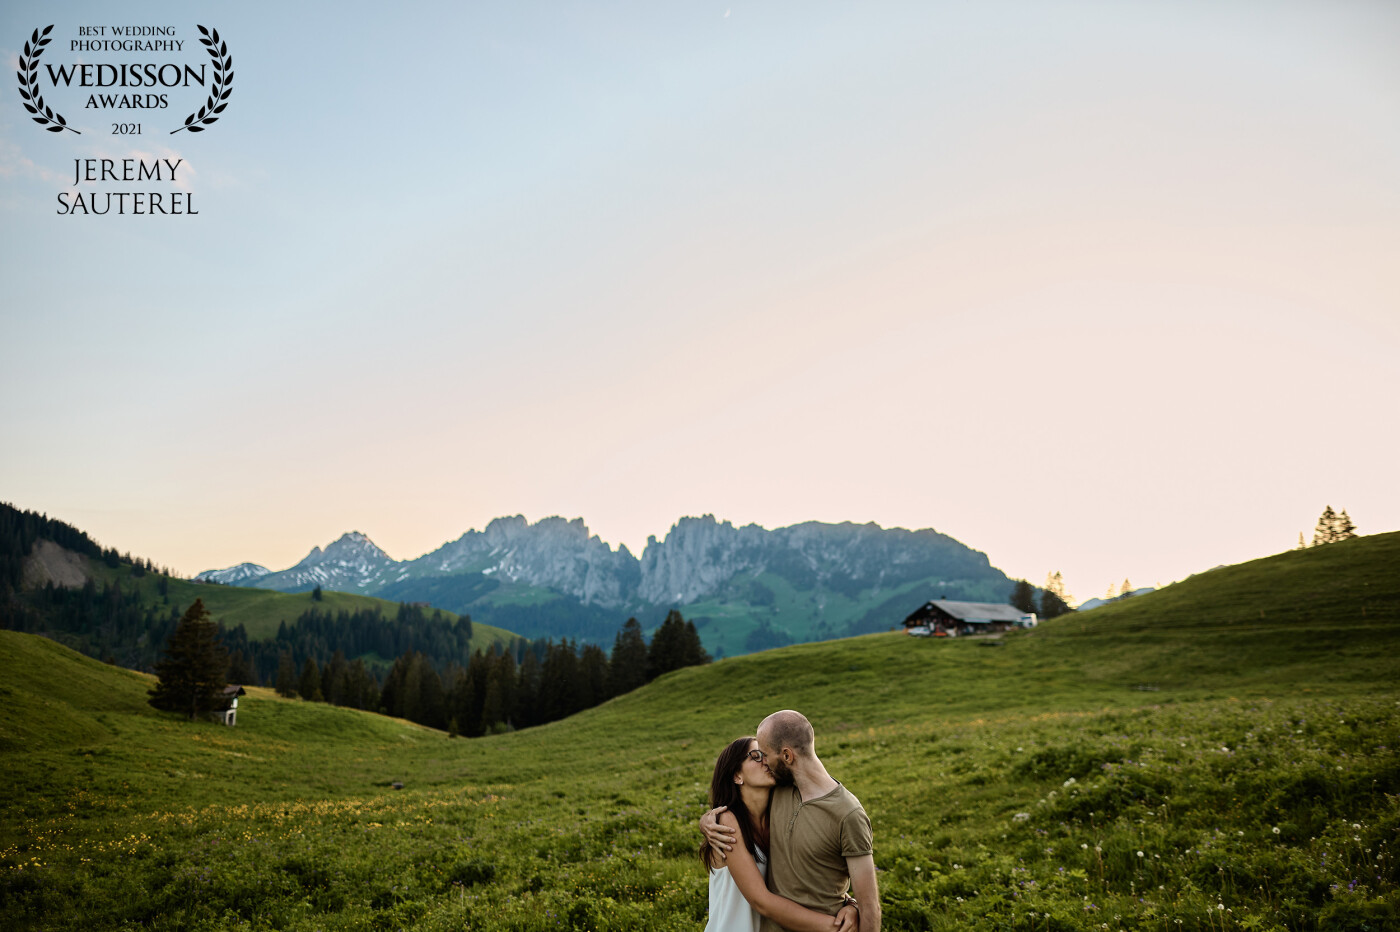 This place is paradise on earth, near the Gastlosen, also called the Swiss Dolomites! A magnificent golden hour, we can also see behind the couple a traditional Swiss alpine chalet.